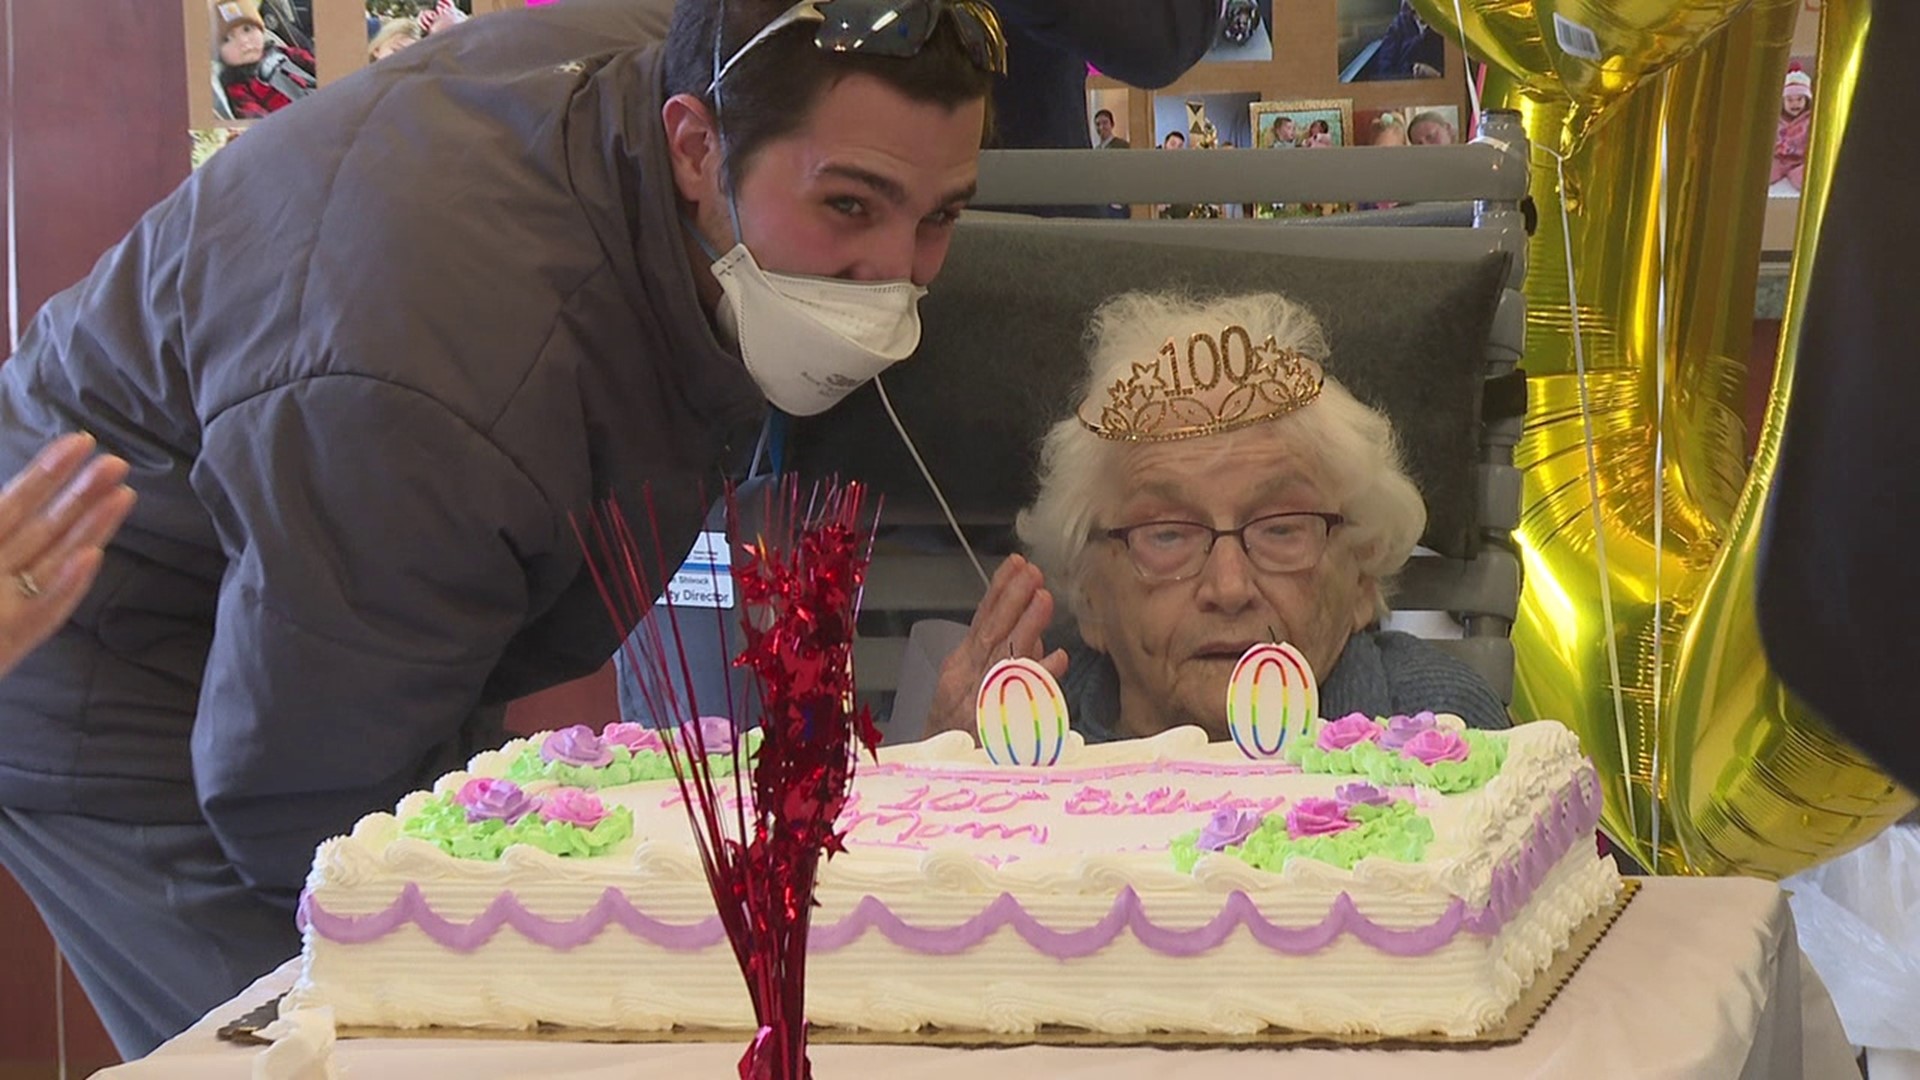 A Lackawanna County woman shares her secret for living to 100 years old.